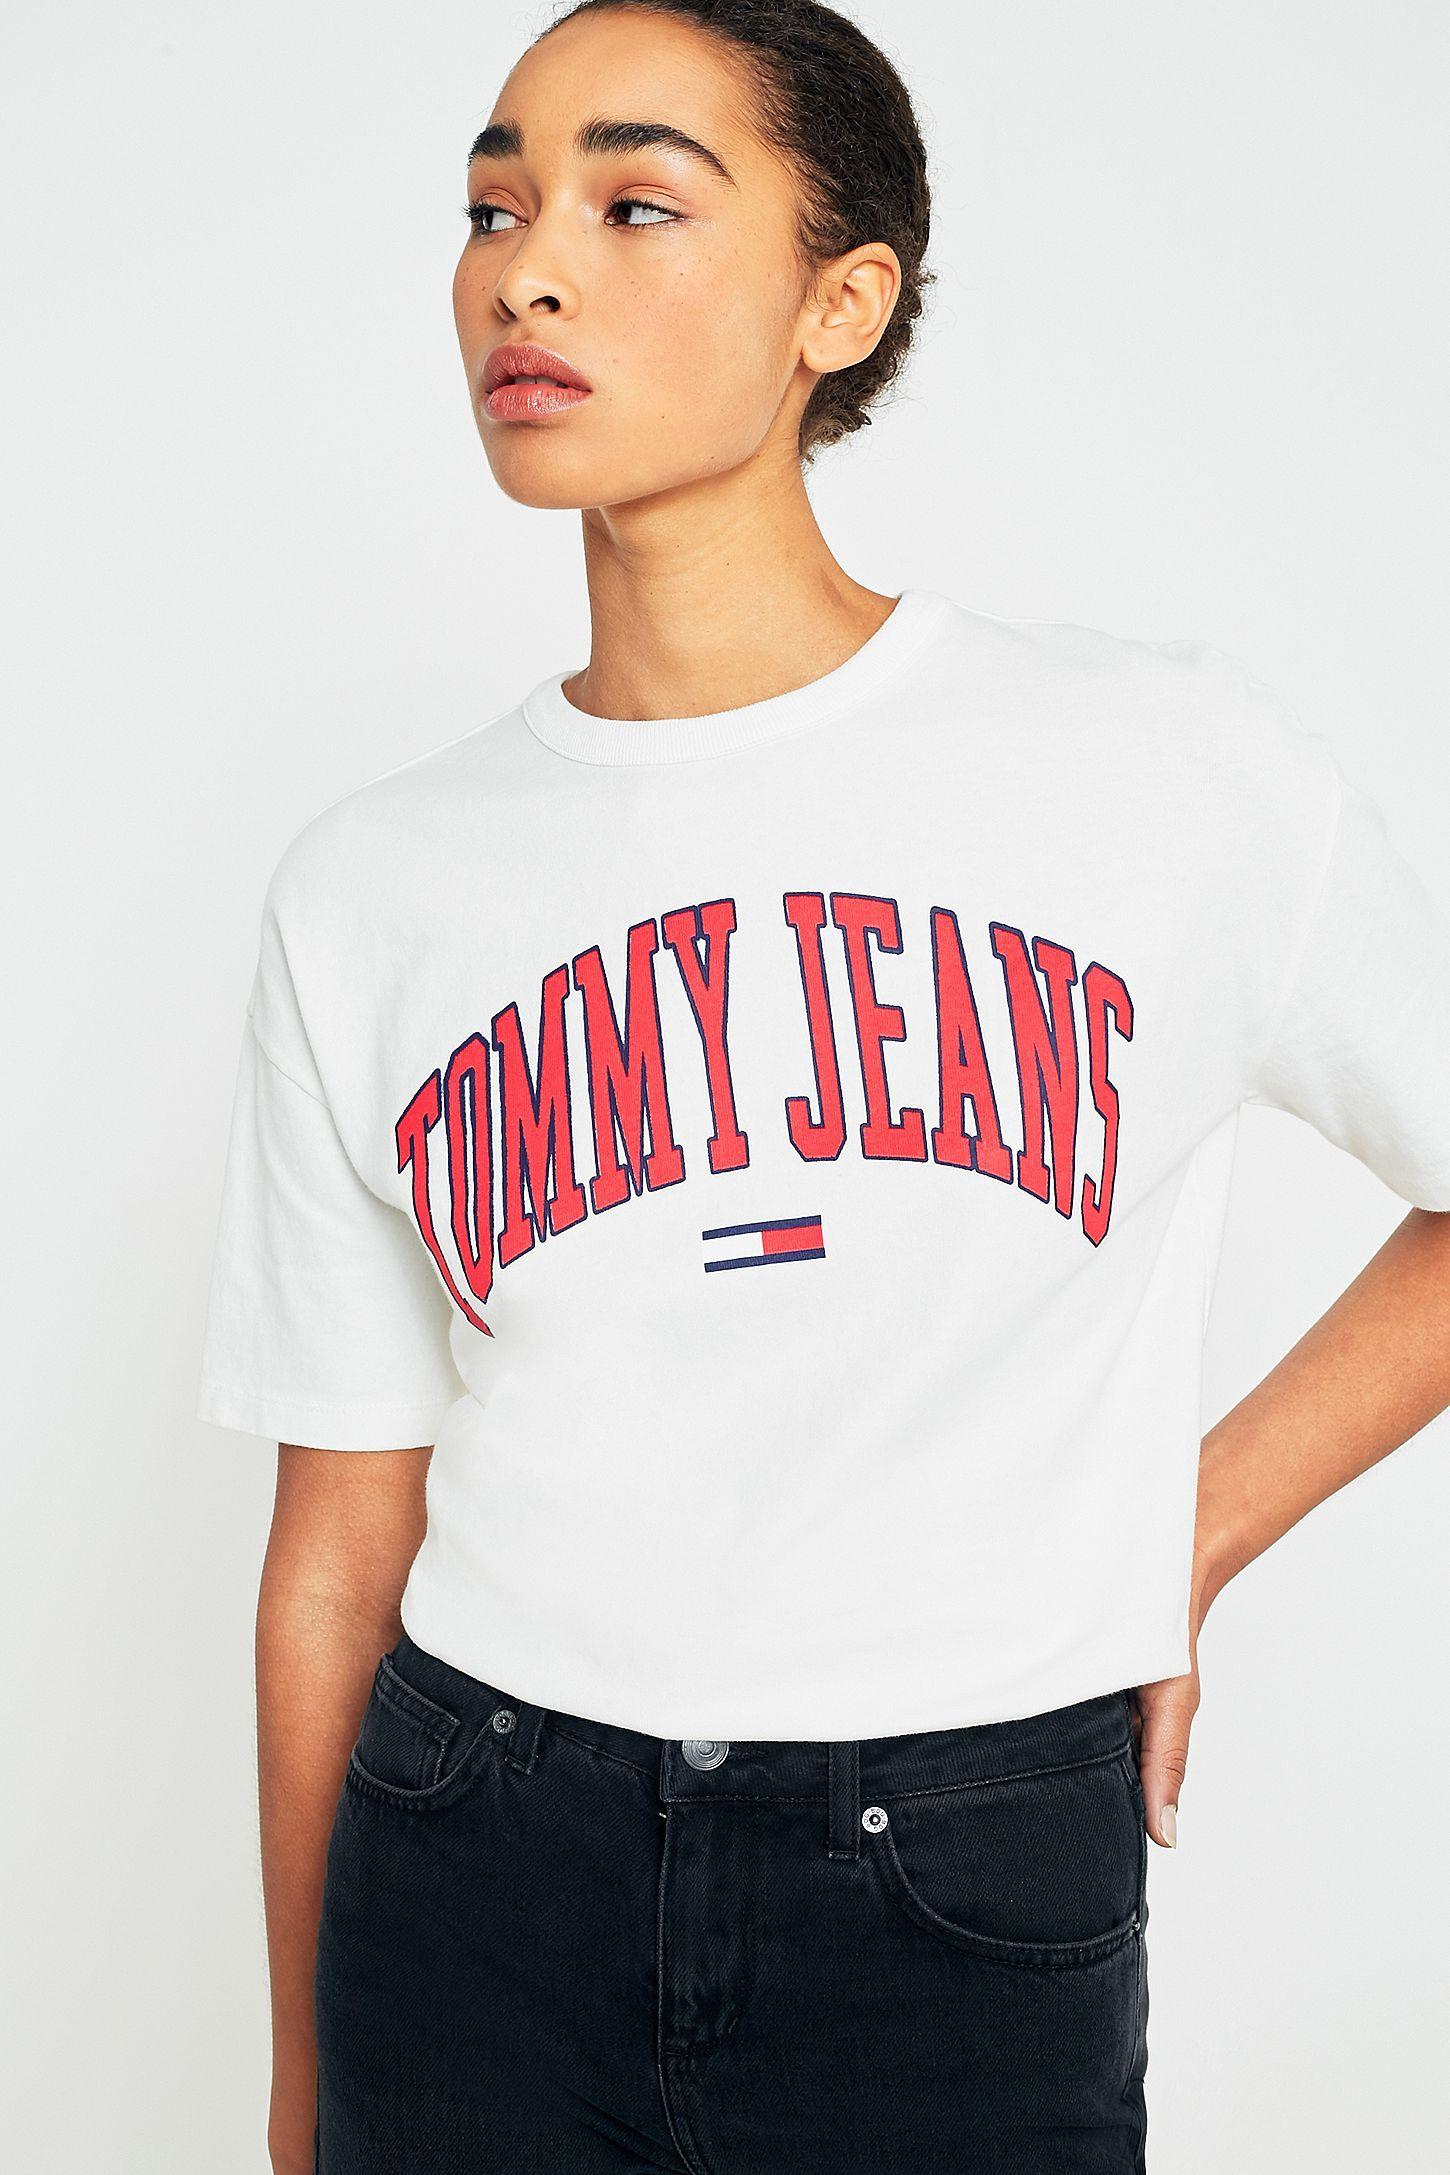 Denim and White Logo - Tommy Jeans Collegiate White Logo T Shirt. Urban Outfitters UK